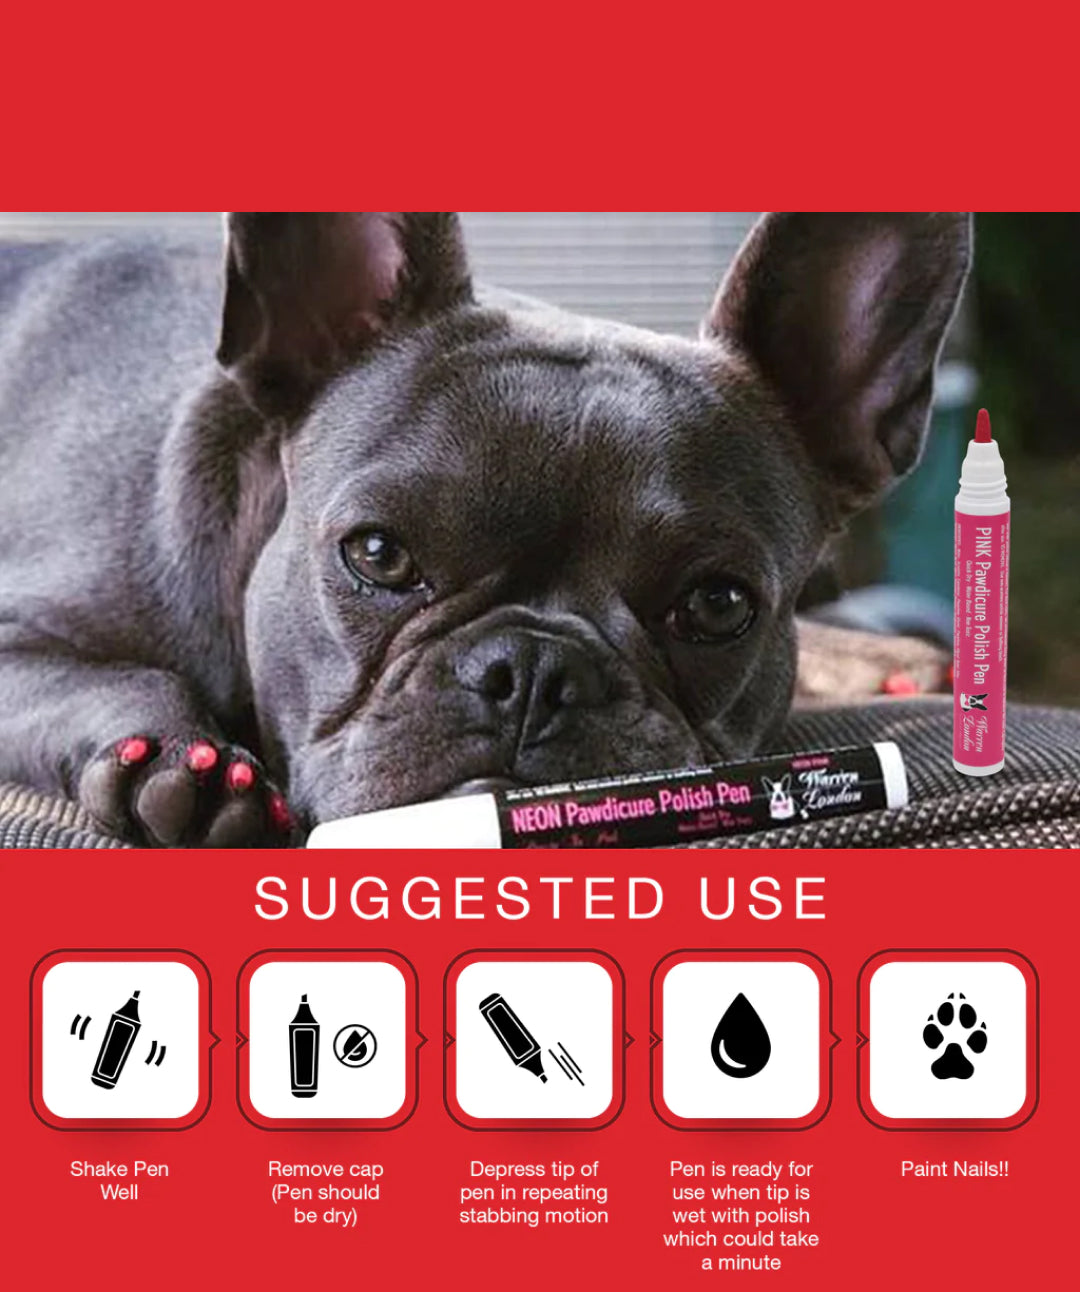 Pawdicure Polish Pens for Dogs Accessories Rover 